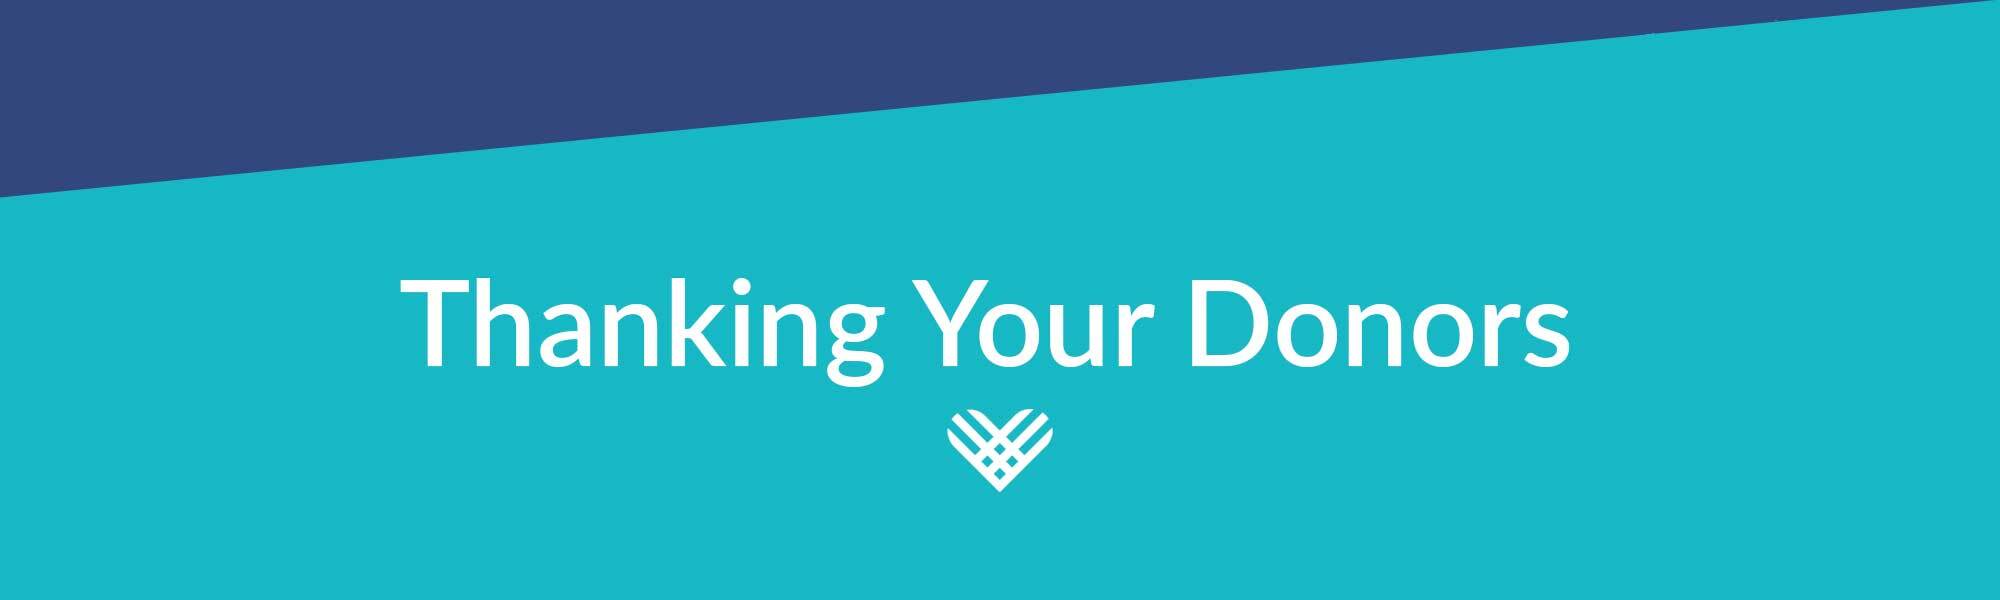 header image for giving tuesday thanking your donors